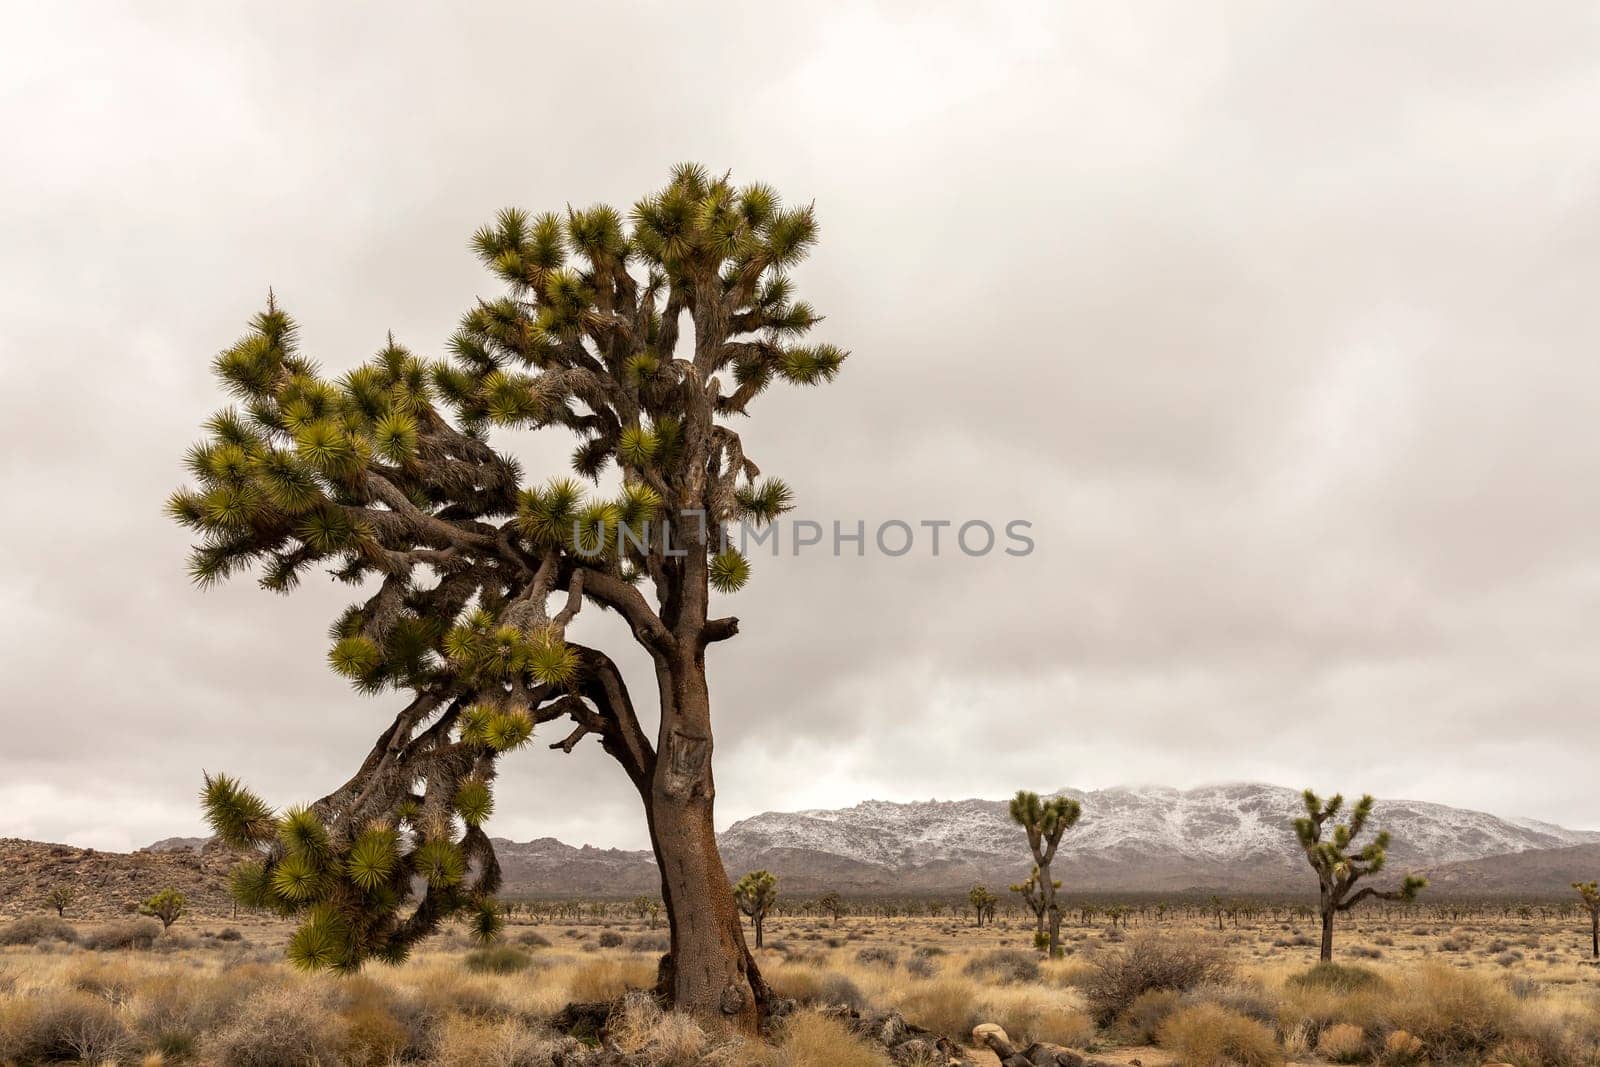 Yucca Brevifolia Plant in Joshua Tree National Park In California. Desert Ecosystems The Mojave And The Colorado Usa. Rock Formation. Gray Sky. Horizontal. Spring Thunderstorm. Mountains on Background by netatsi